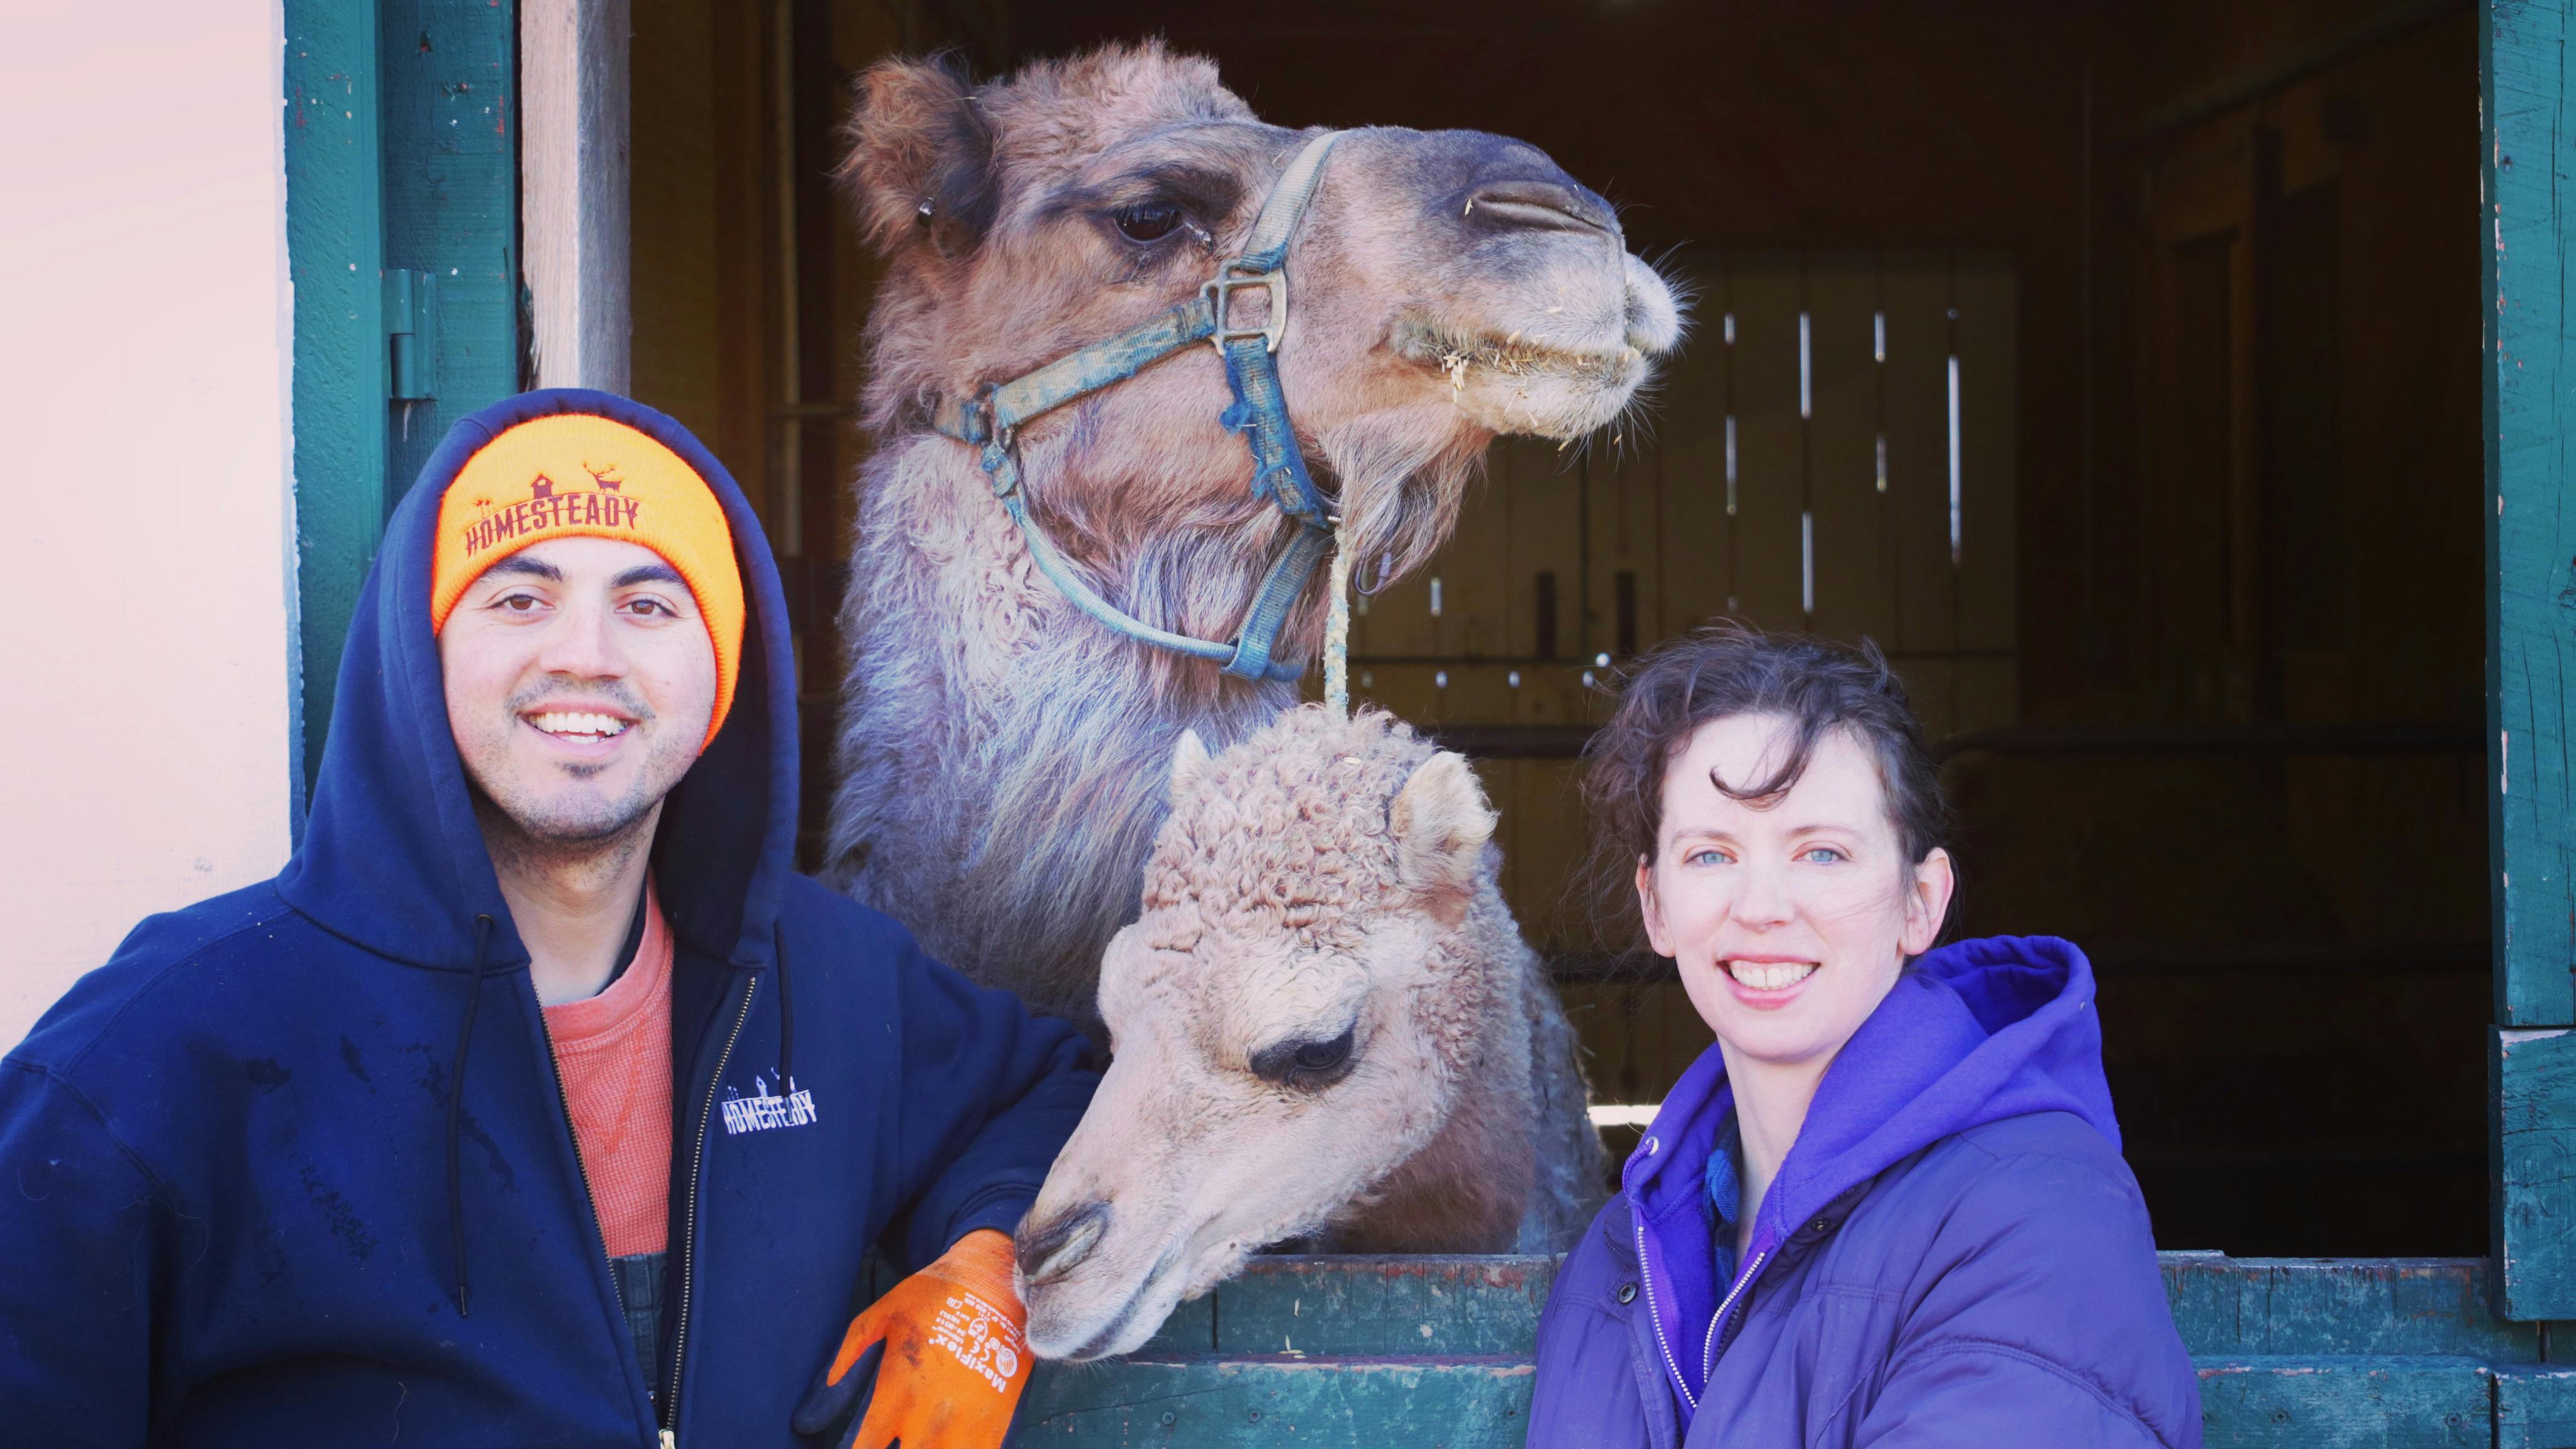 THESE HOMESTEADERS JUST BOUGHT MILK CAMELS... WHY?!?!